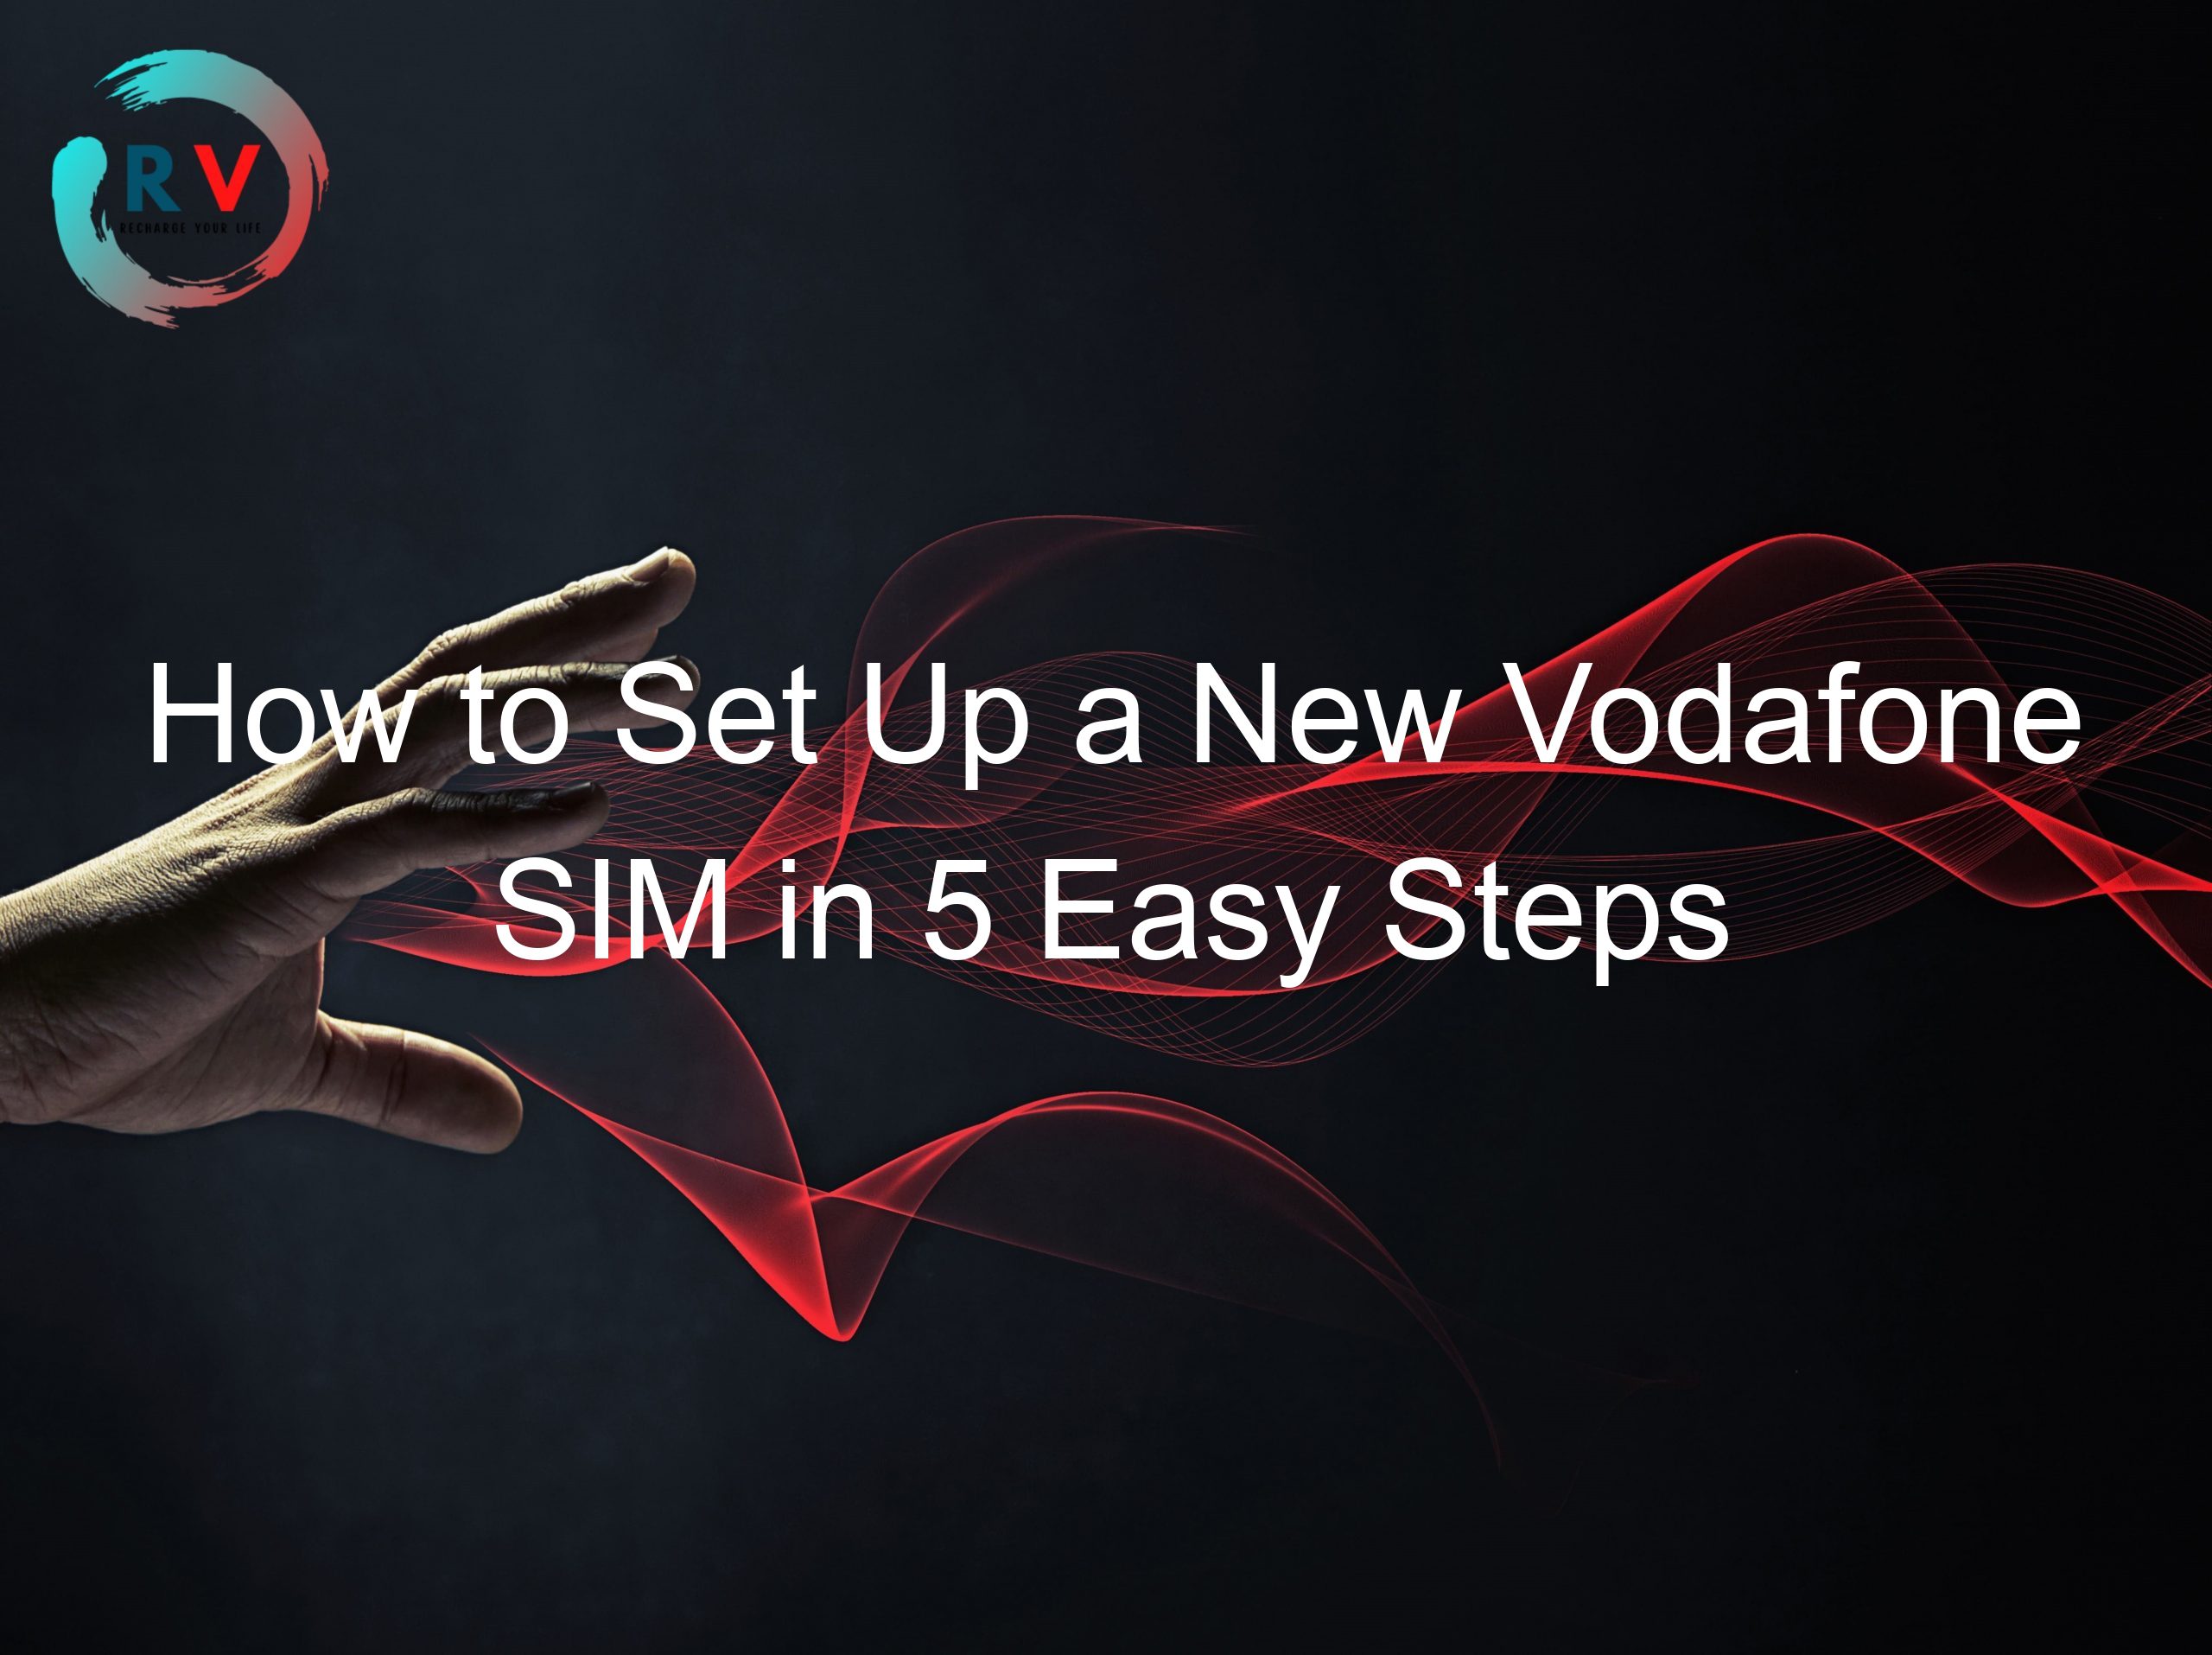 How to Set Up a New Vodafone SIM in 5 Easy Steps